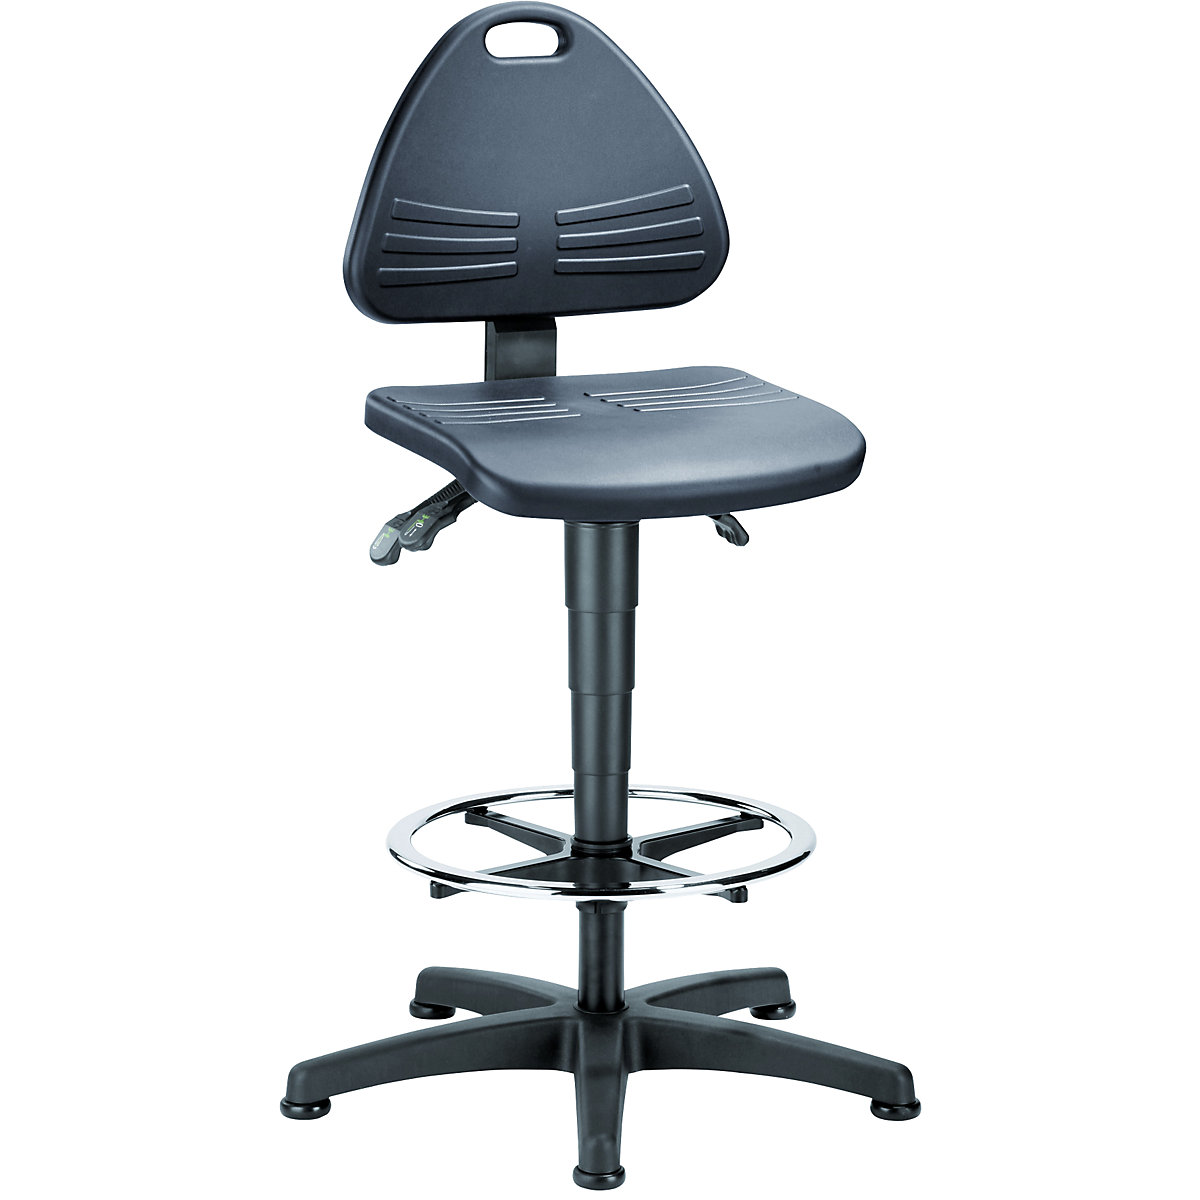 Industrial swivel chair – bimos, PU foam upholstery, with floor glides and foot ring, gas lift height adjustment from 580 – 850 mm-2